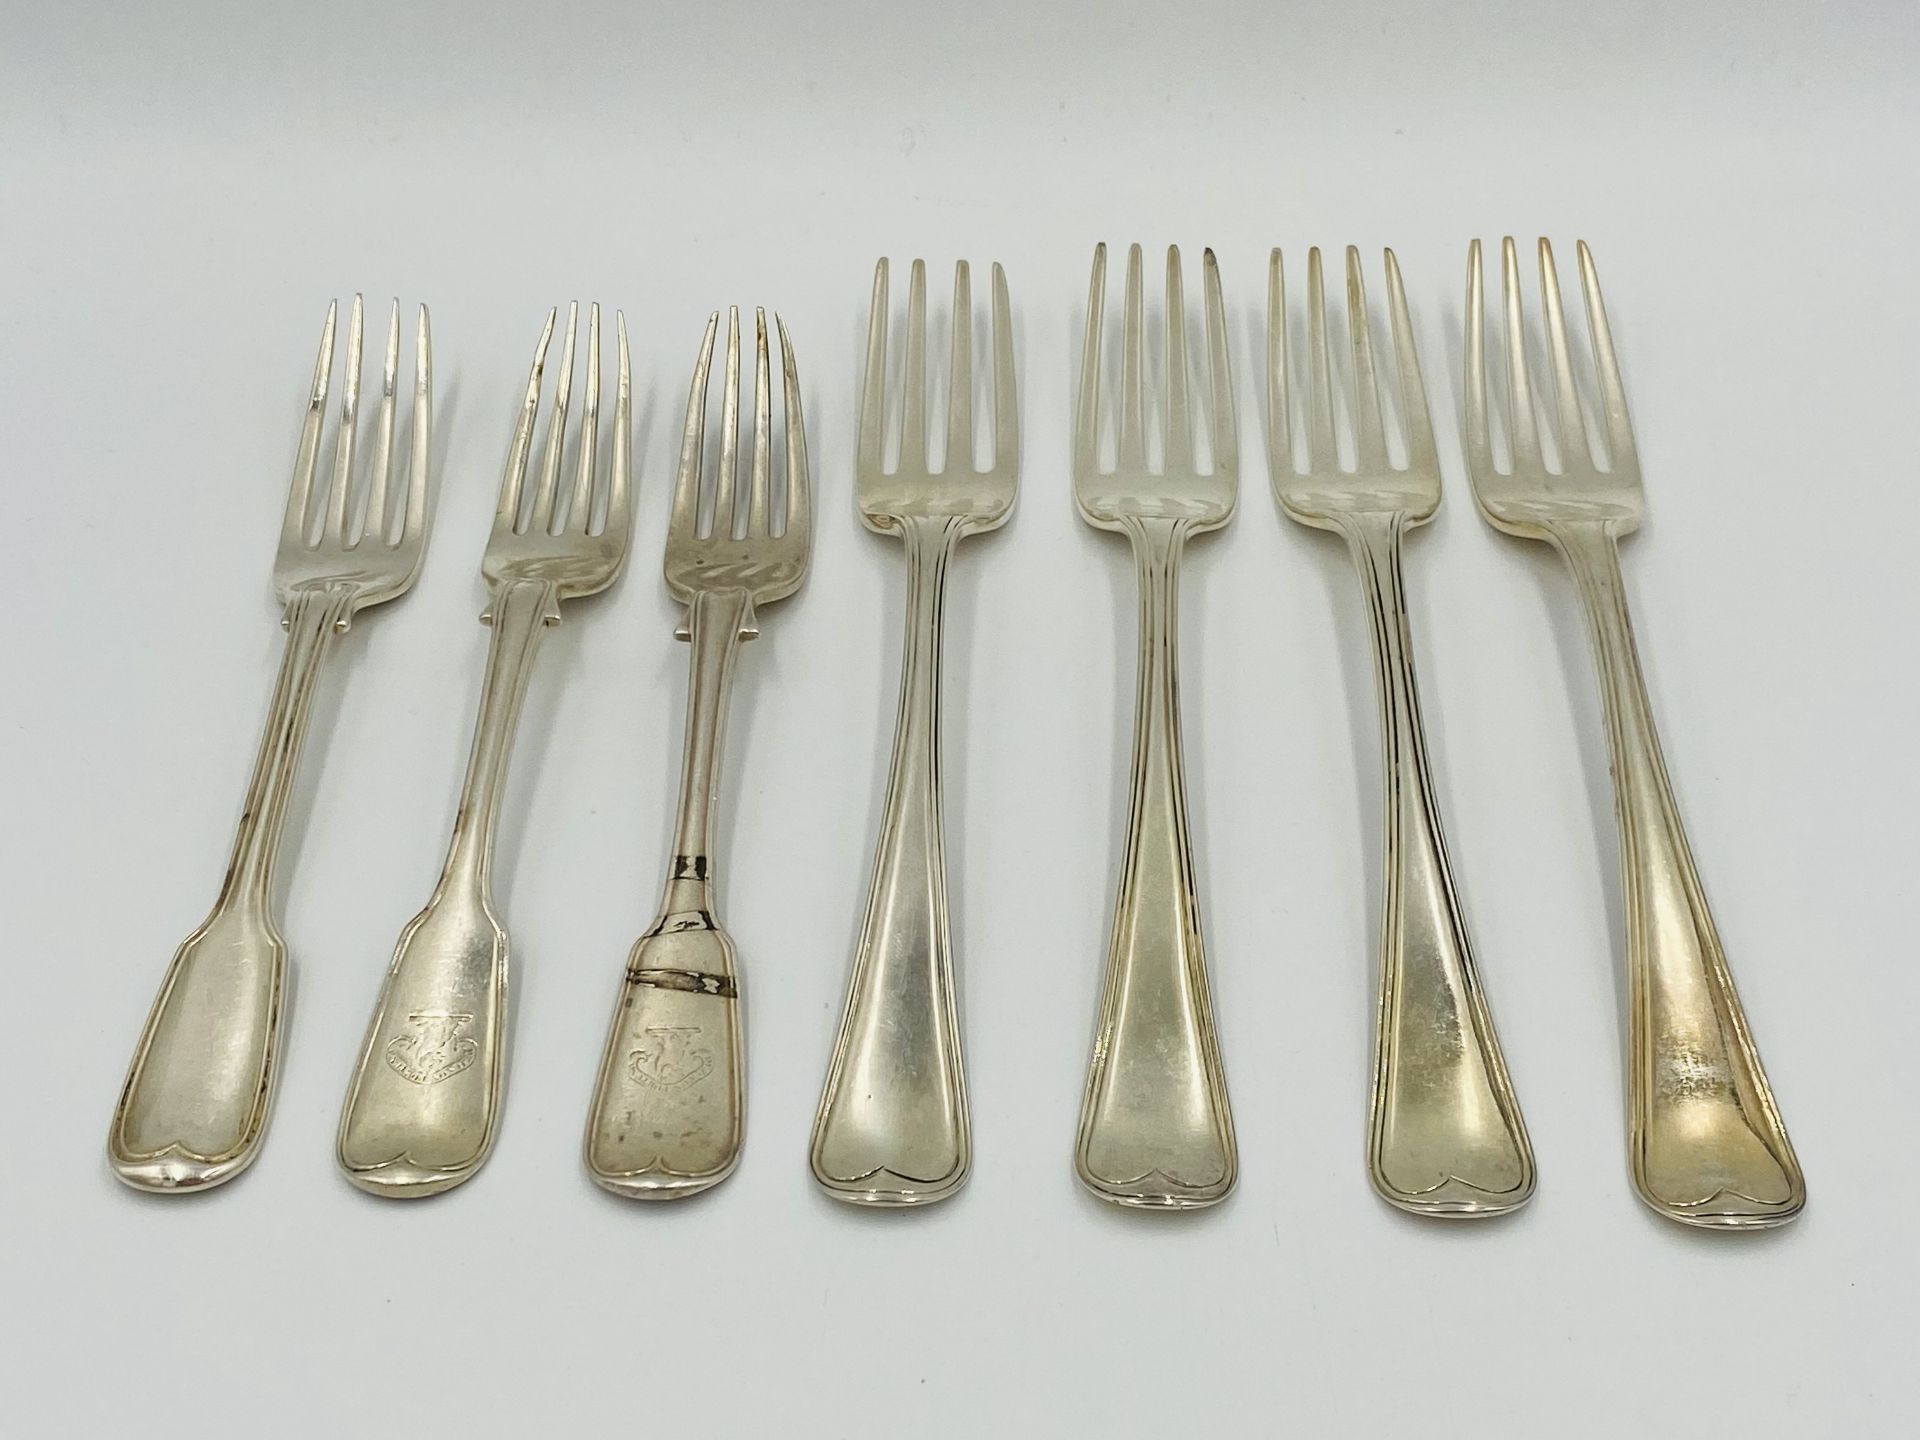 Four silver forks, 1815; together with four silver forks, 1839